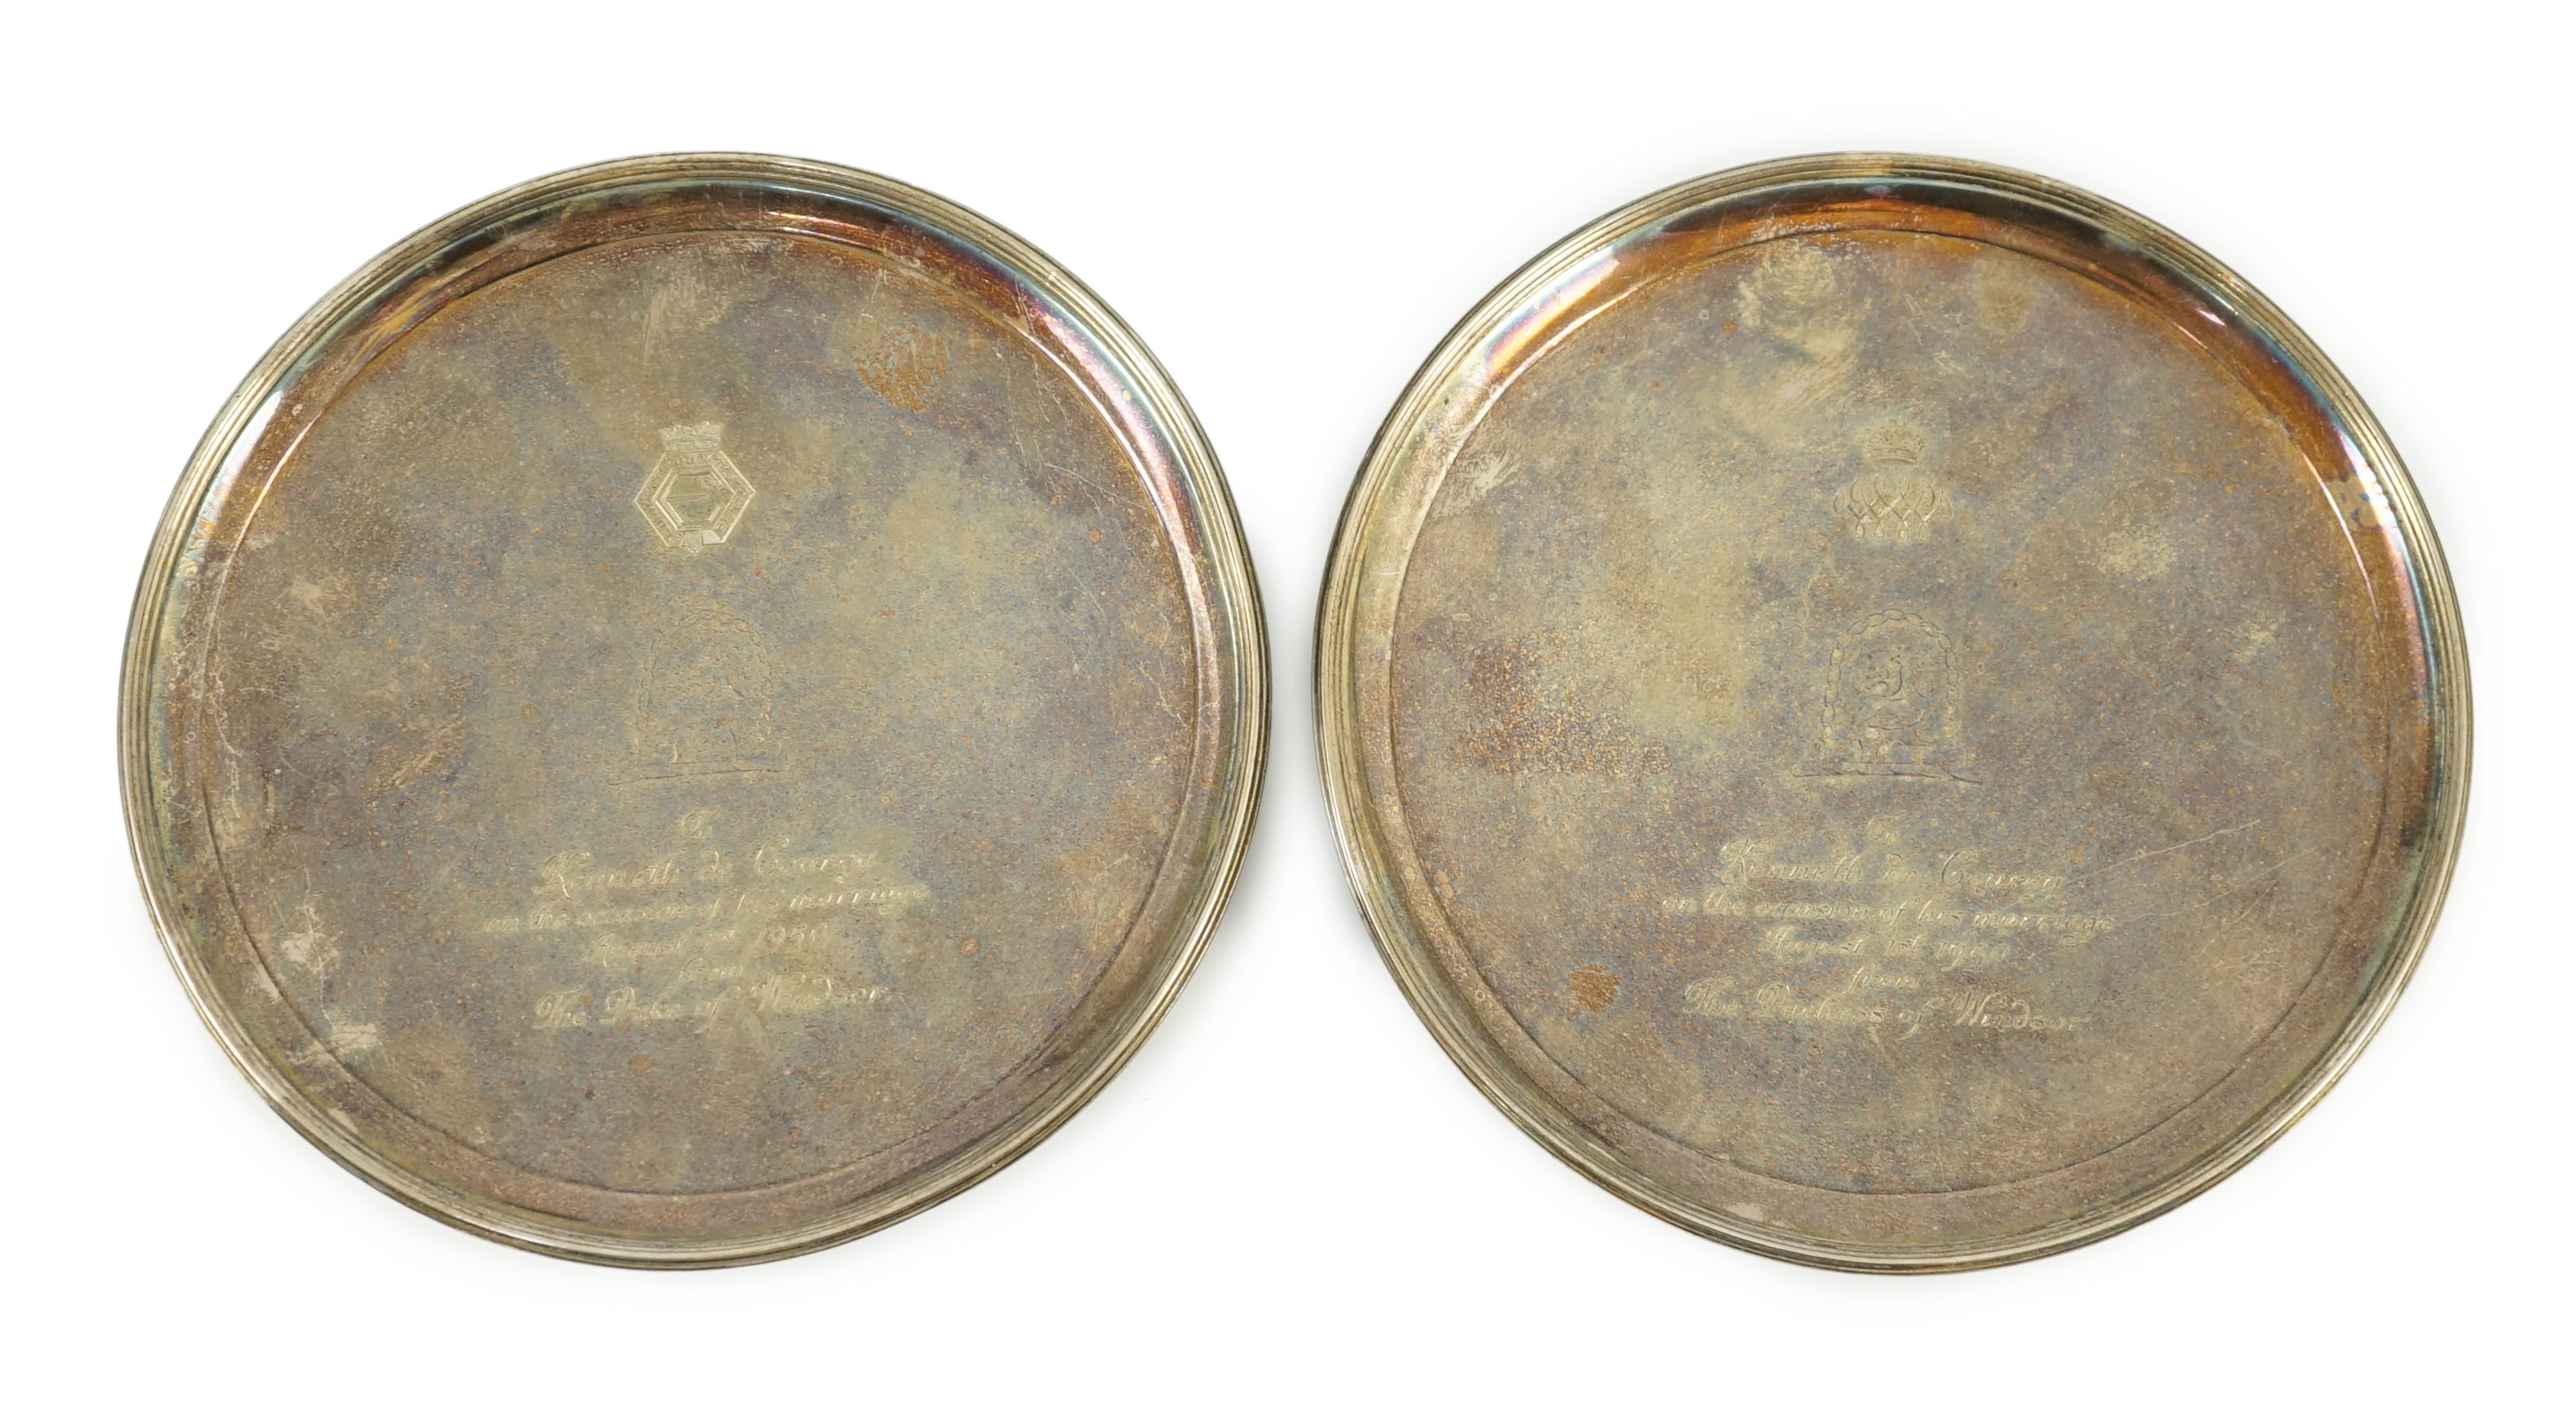 A pair of George III silver waiters, by Crouch & Hannam, with later engraved Royal presentation inscription and crest, 'To Kenneth de Courcy on the occasion of his marriage August 1st 1950, from The Duke & Duchess of Win